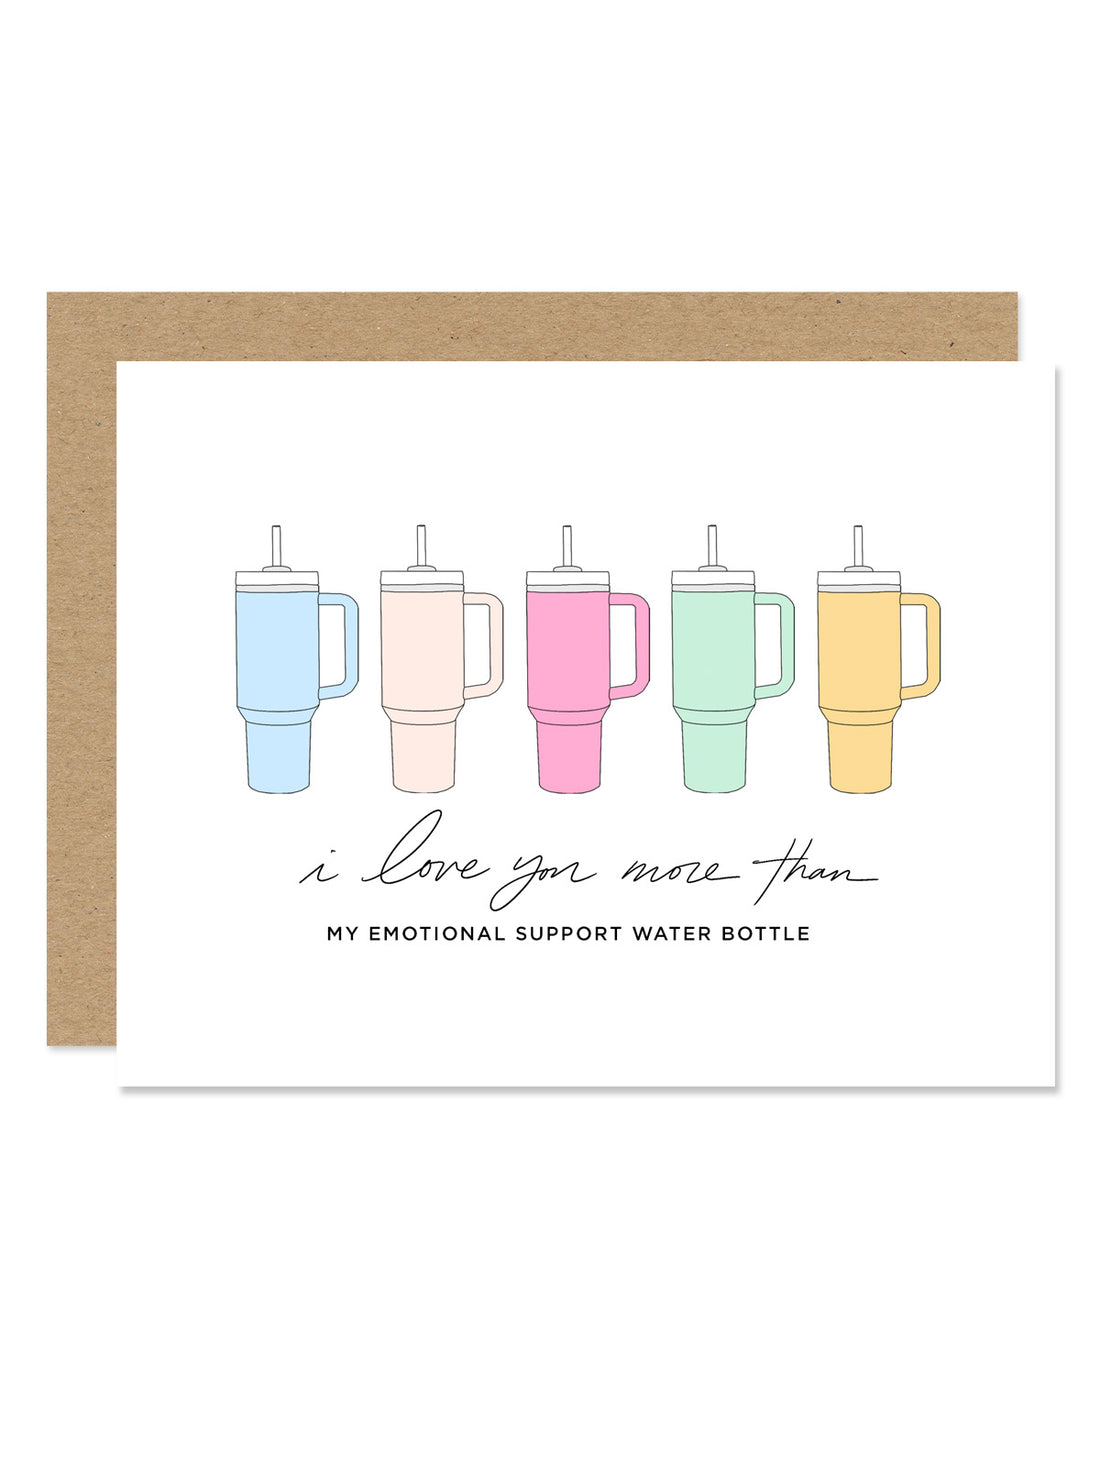 Emotional Support Water Bottle Card